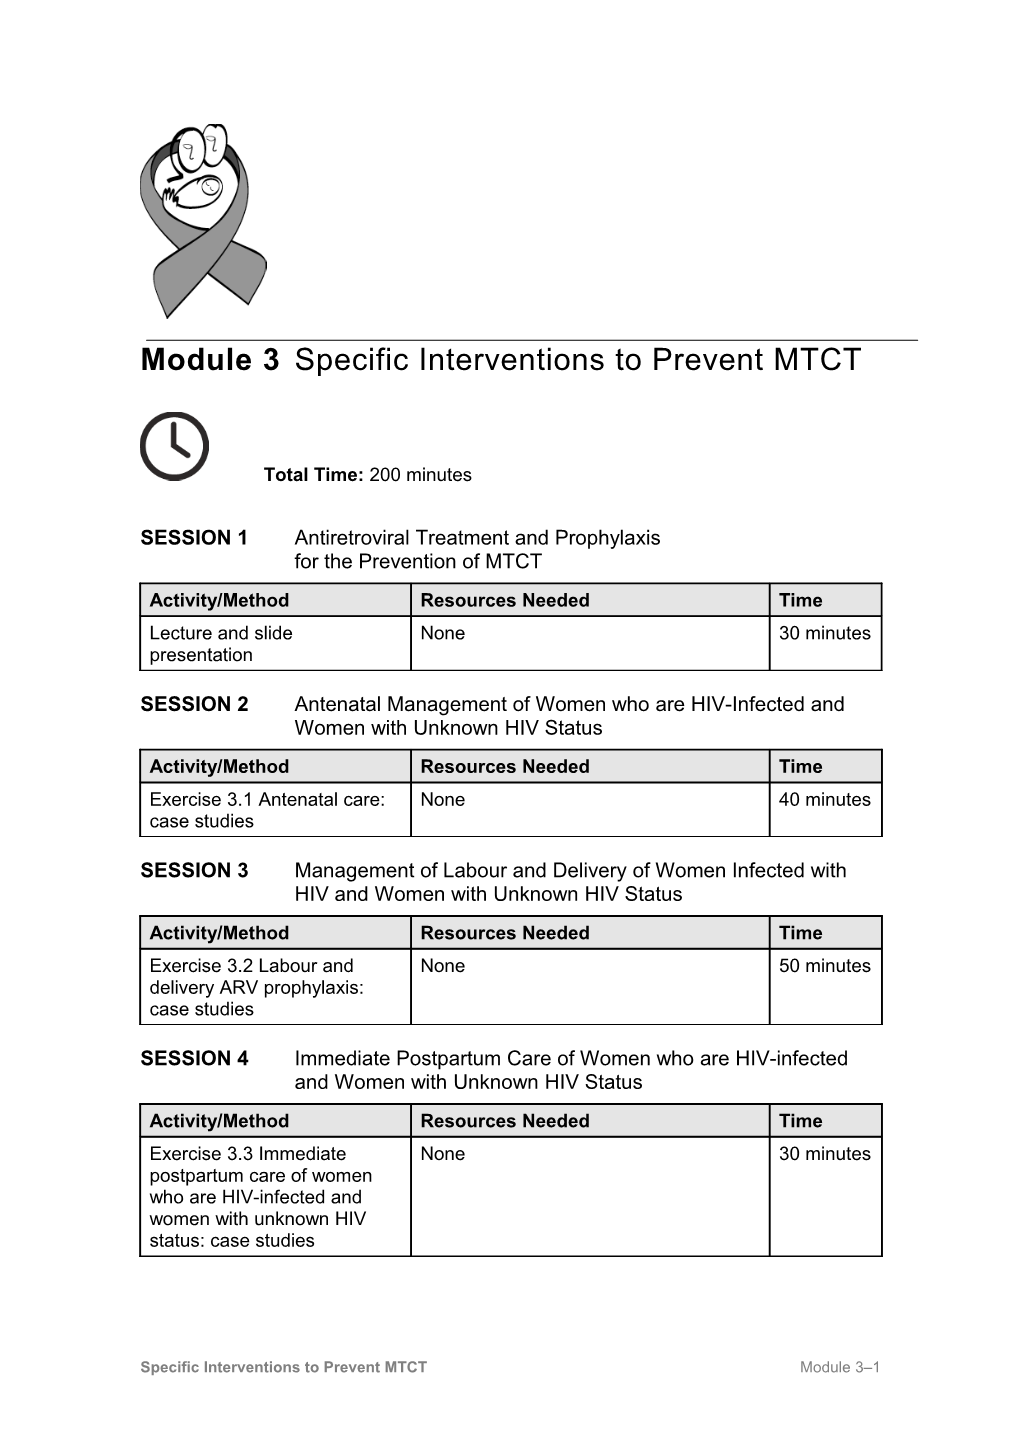 Module 3 Specific Interventions to Prevent MTCT